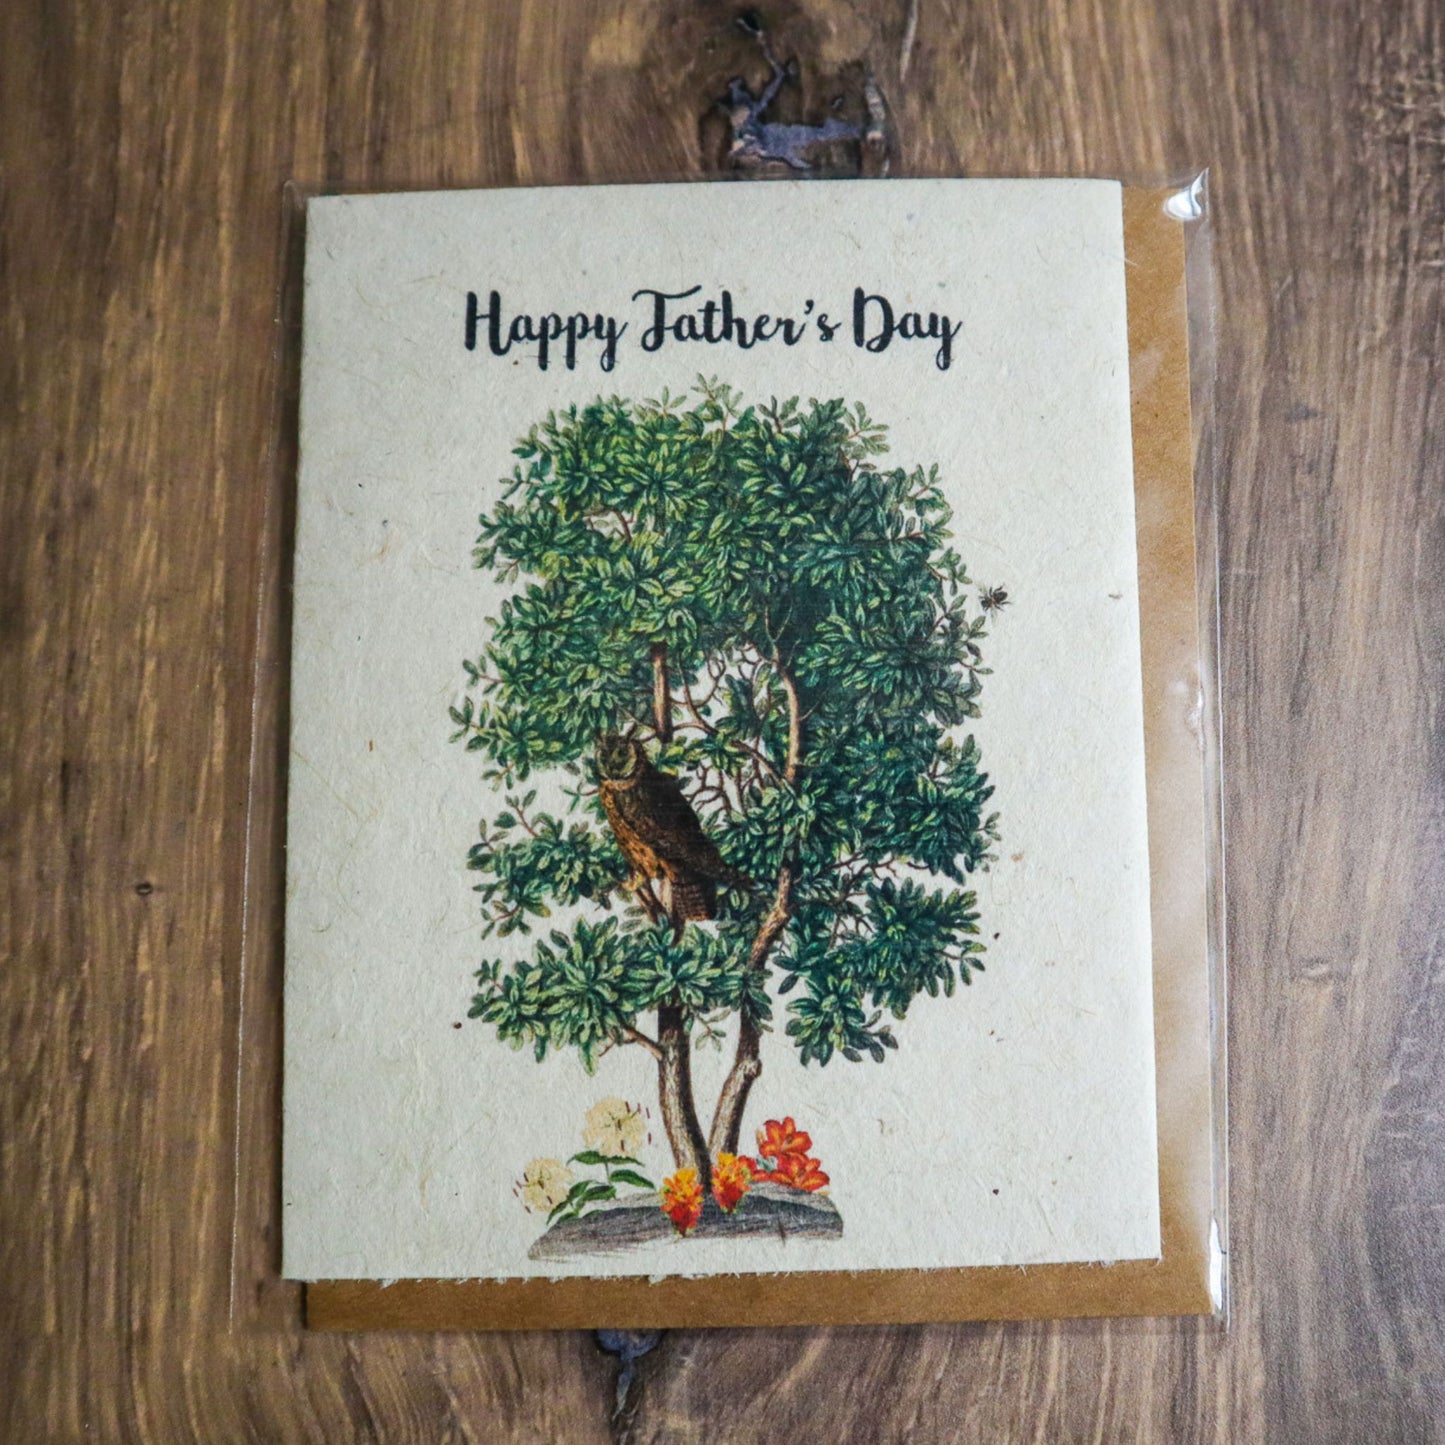 Father's Day card with owl in tree greeting card that is eco friendly and plantable